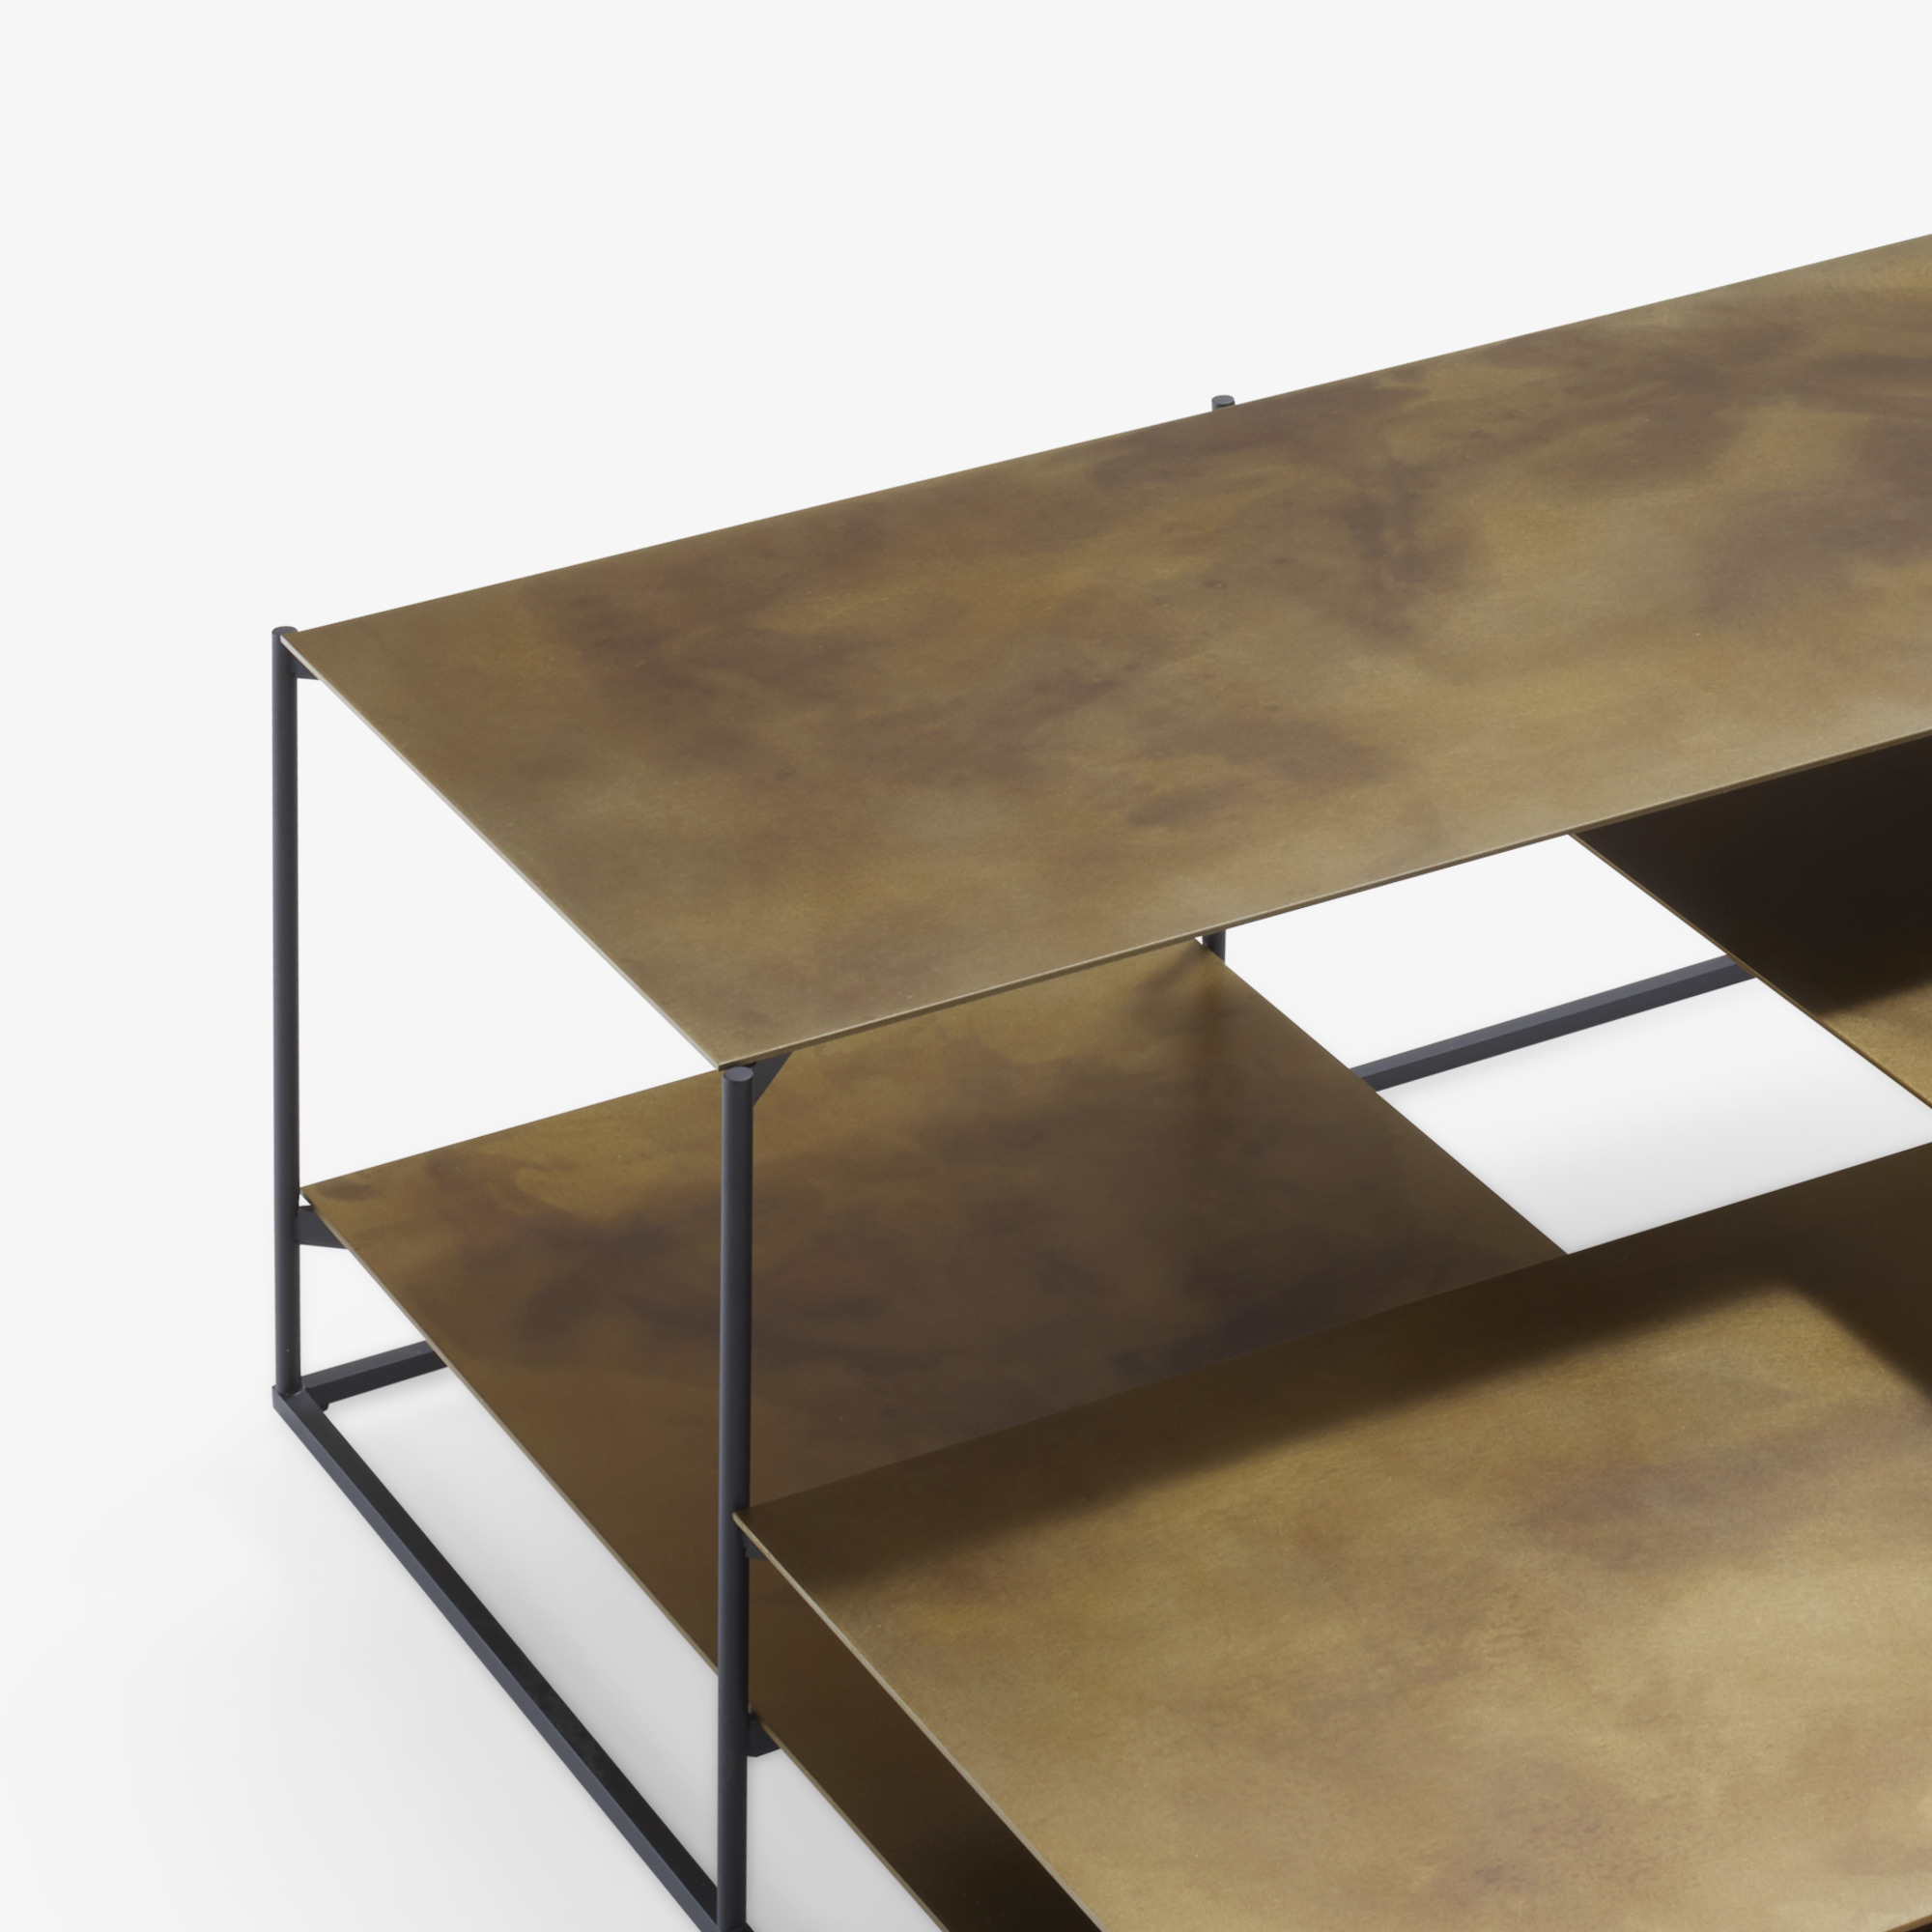 Image Low table small tops in golden brass aspect steel 5